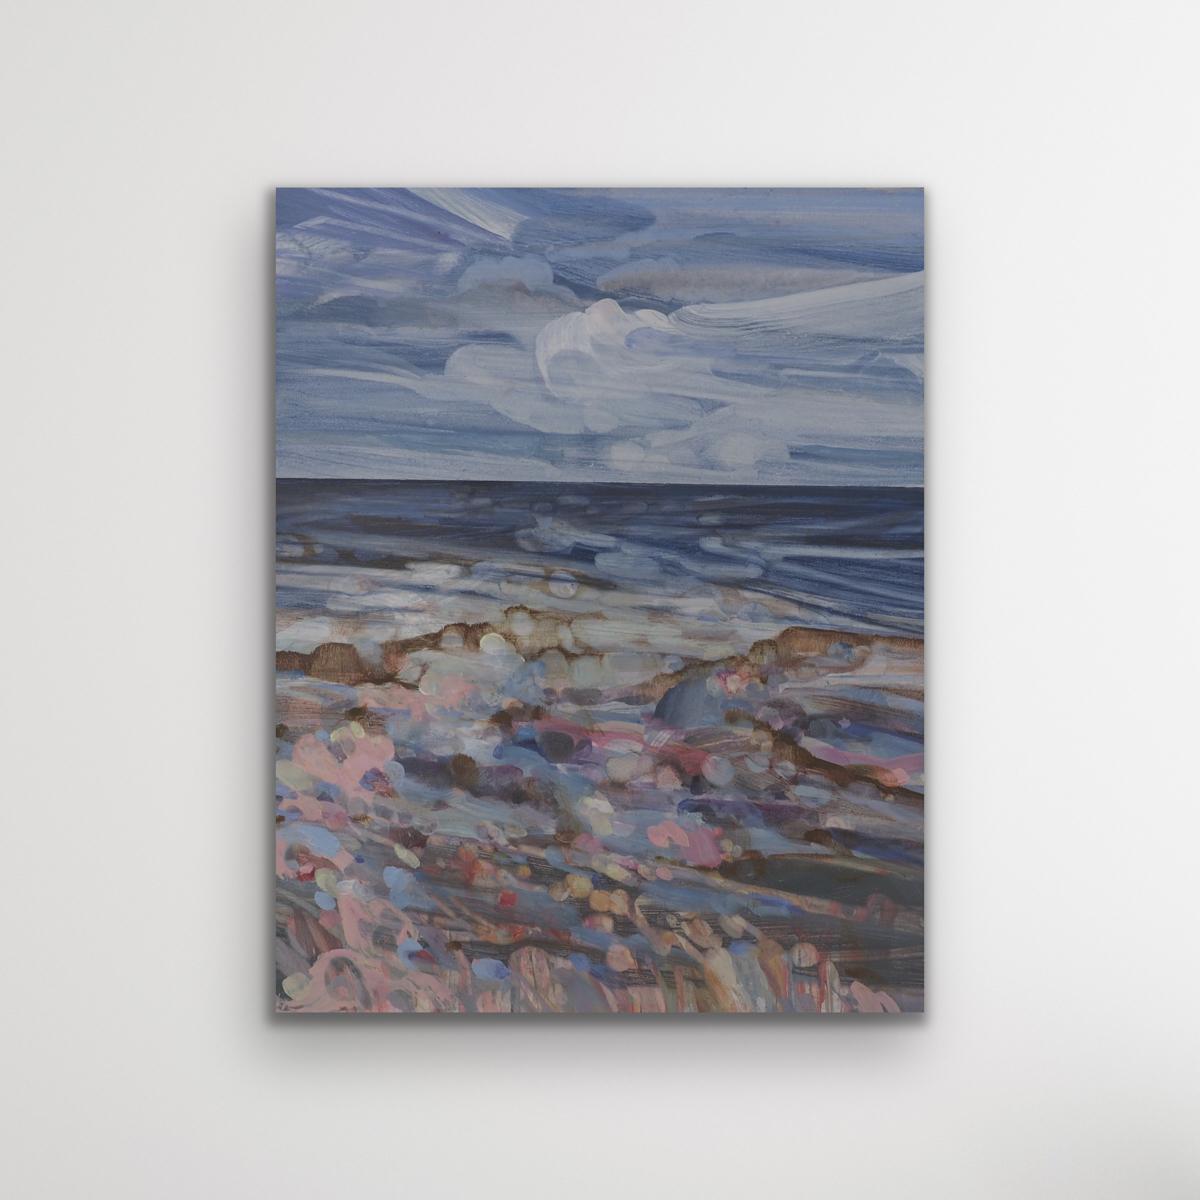 Beneath the Breastbone is an original miniature painting by Norfolk painter Louisa Longstaff Scales. This bright and lively seascape would be perfect for a bedroom or hallway space.

Louisa Longstaff-Scales, painter, works available online and in